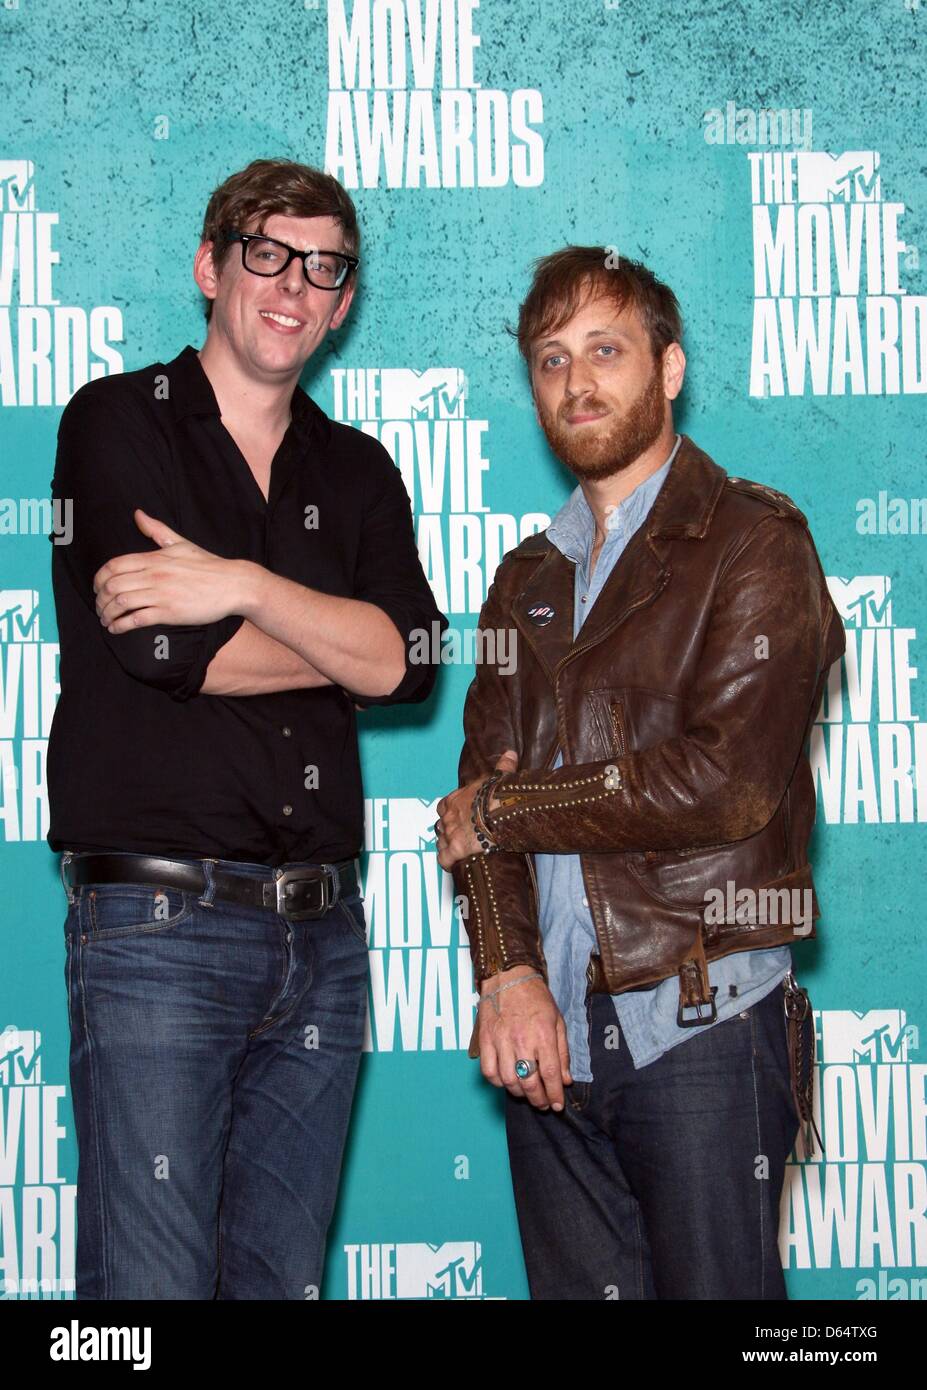 Musicians Patrick Carney (L) and Dan Auerbach of US rock band The